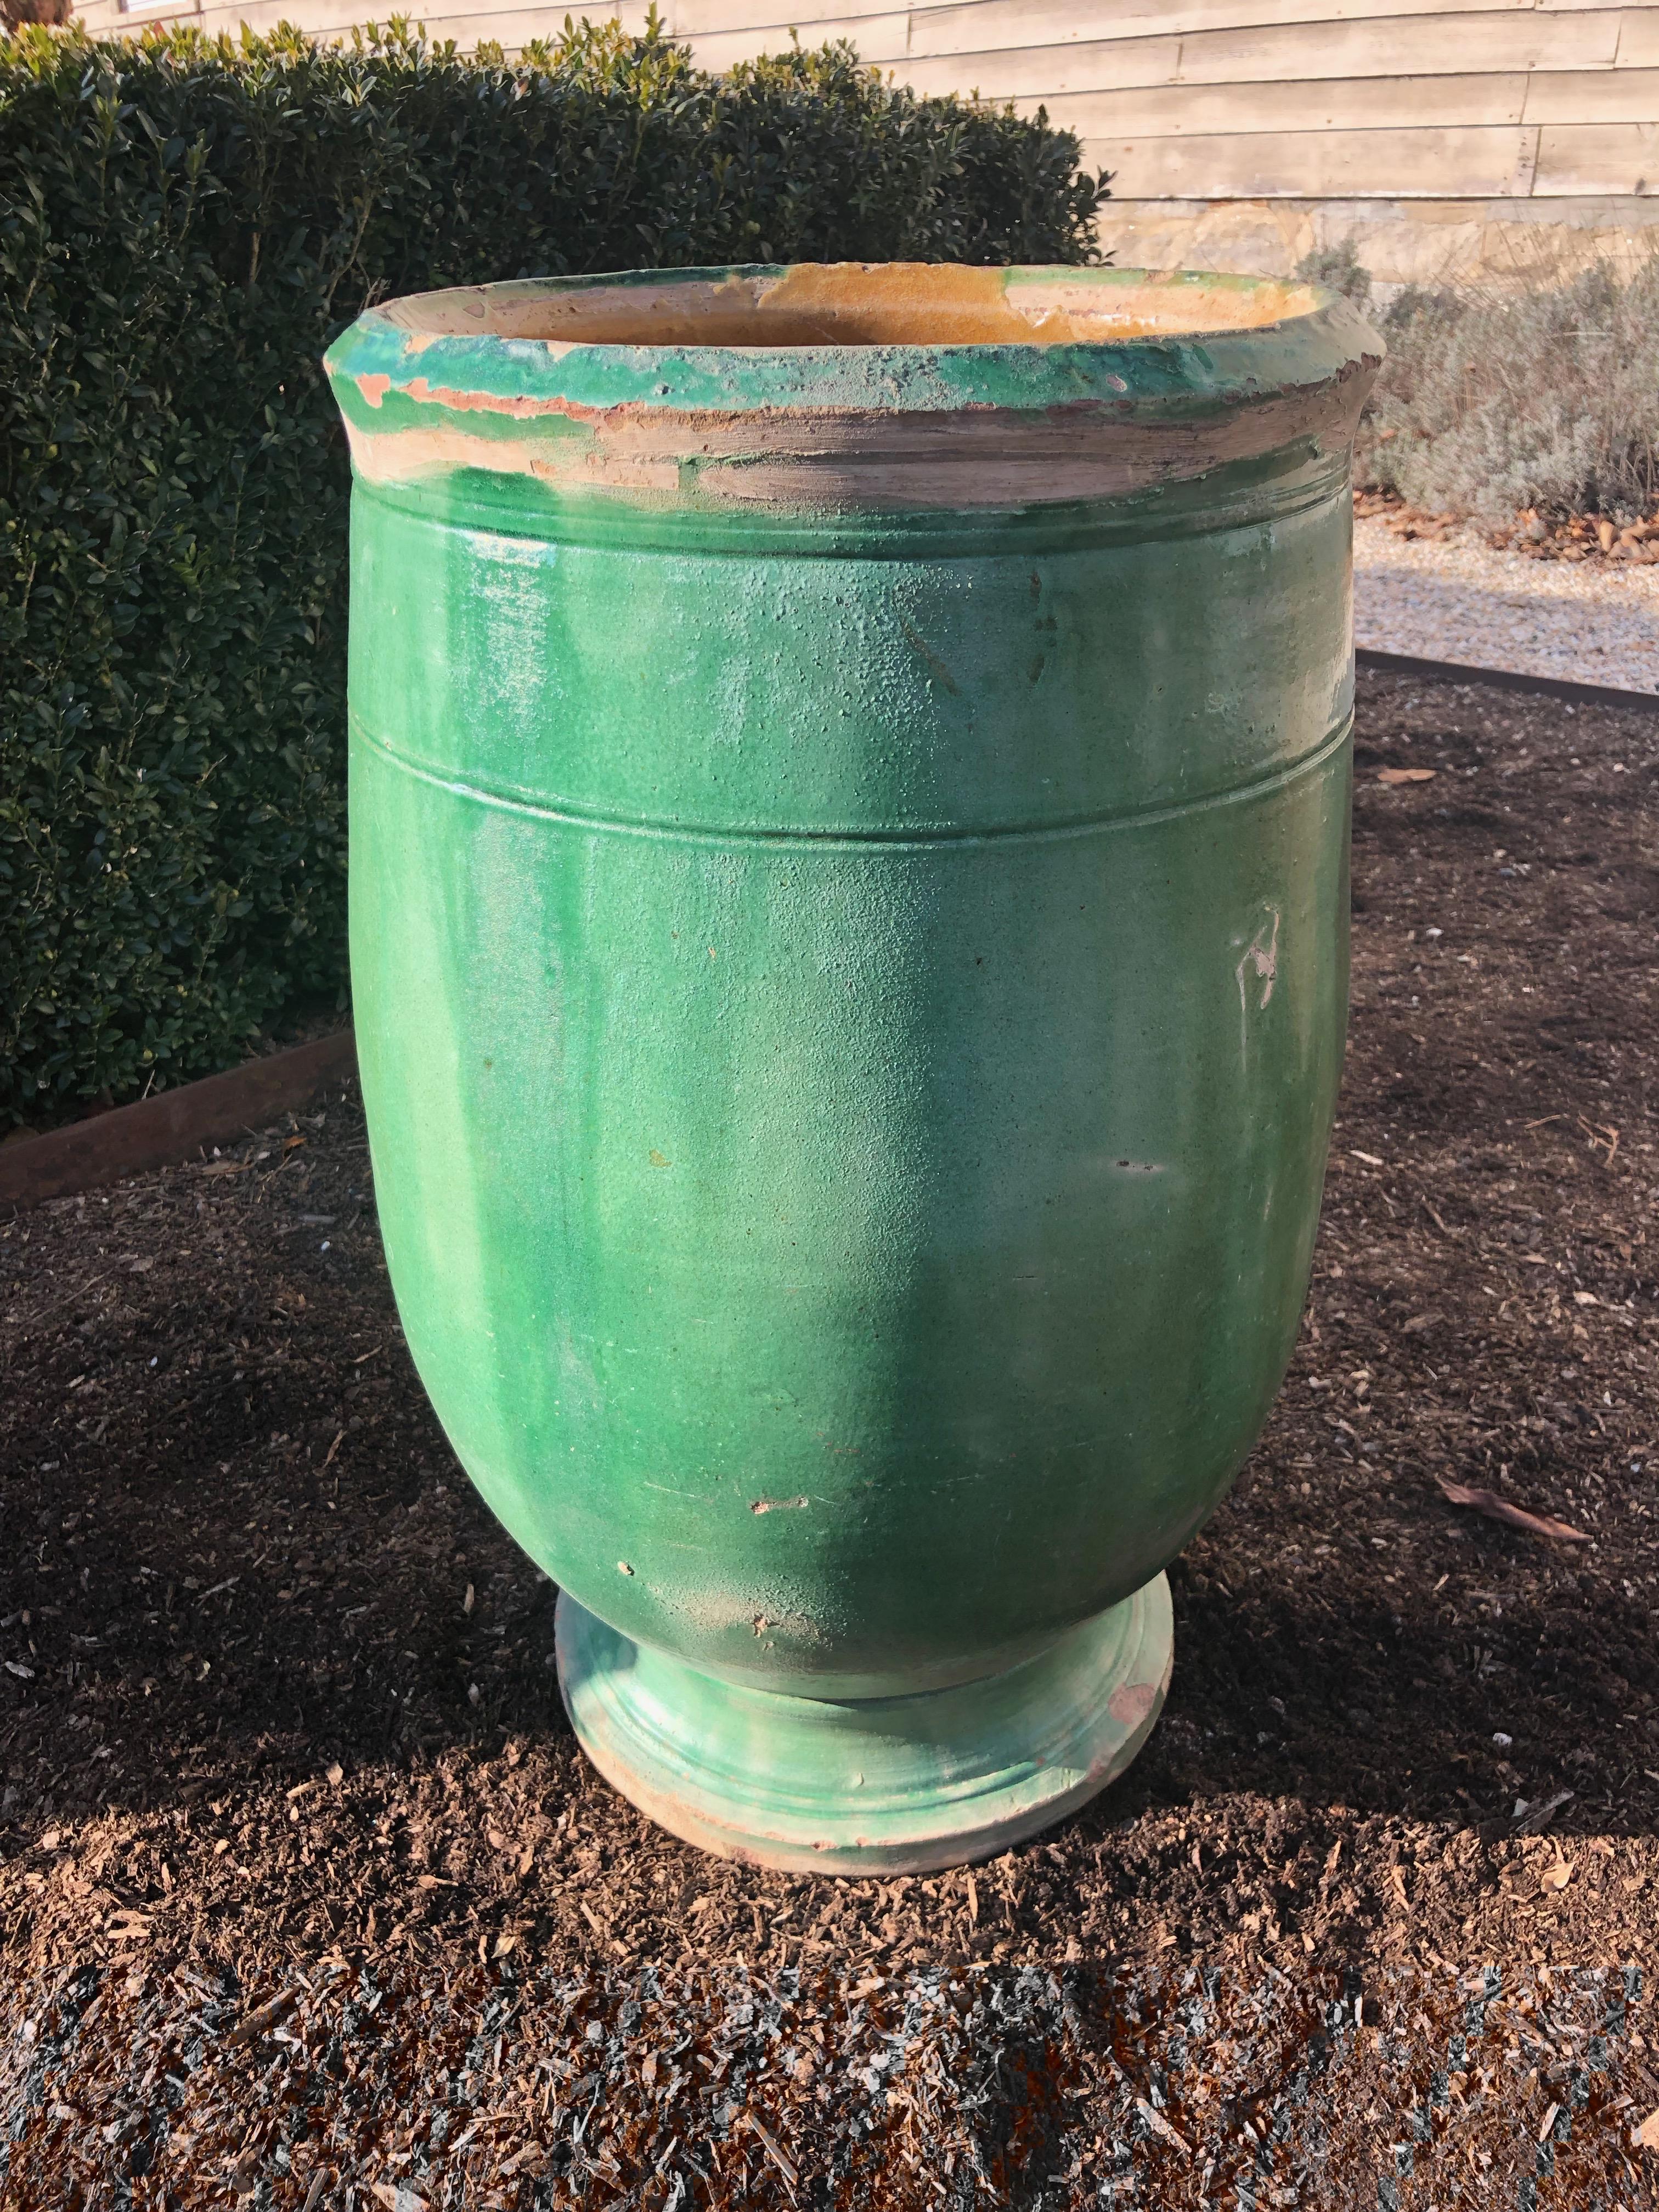 It’s true that we have a thing for green-glazed 19th century pots, and this one from Apt in the South of France is a beauty. One of three that we currently have in stock (see CPO #1044 and CPO #1036), it is also glazed in an ochre color on the